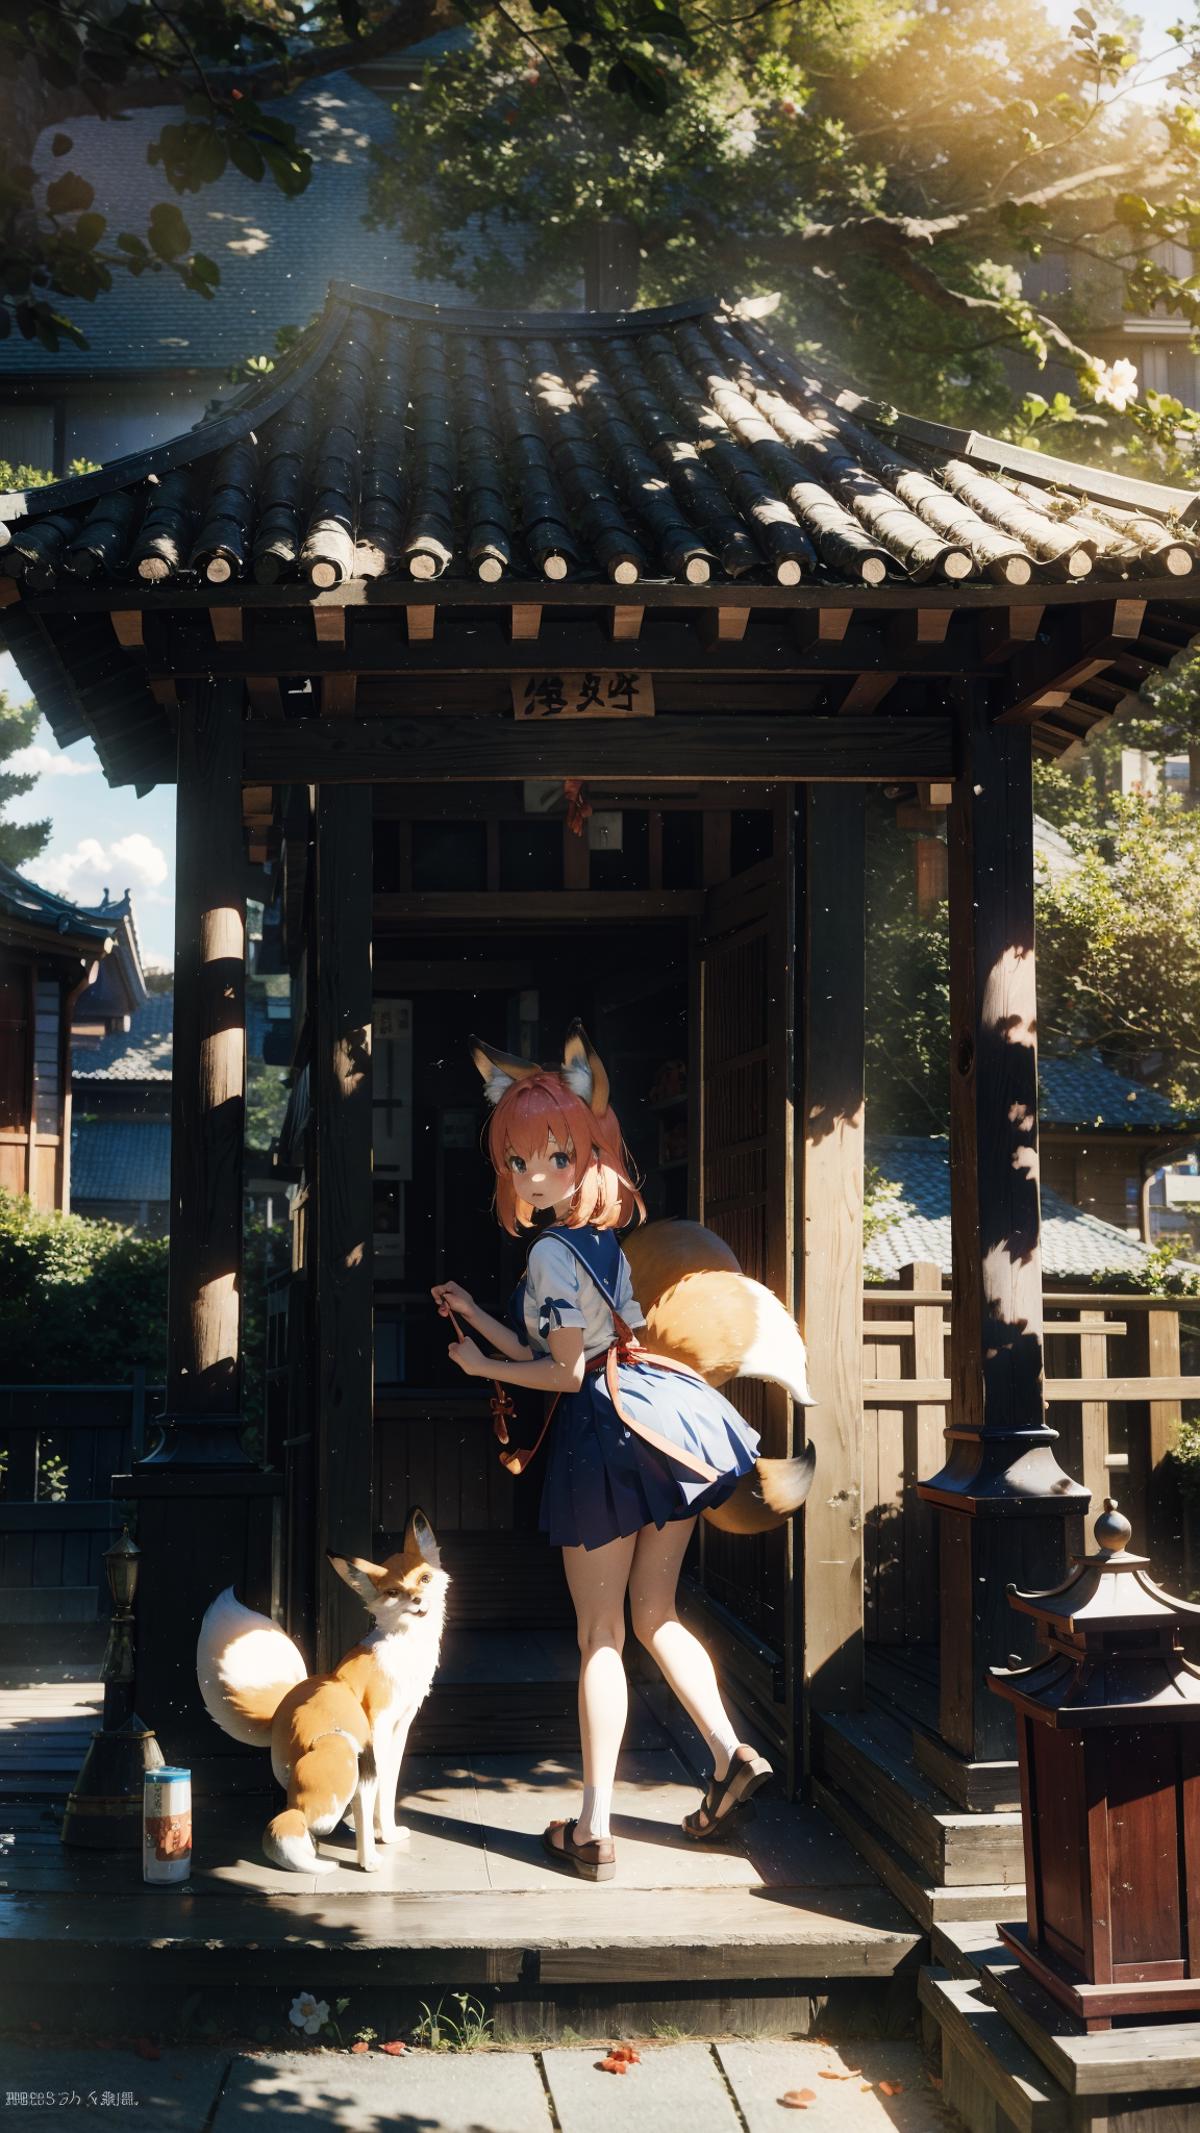 Anime-style character with fox tail and two dogs, possibly in a Japanese setting.